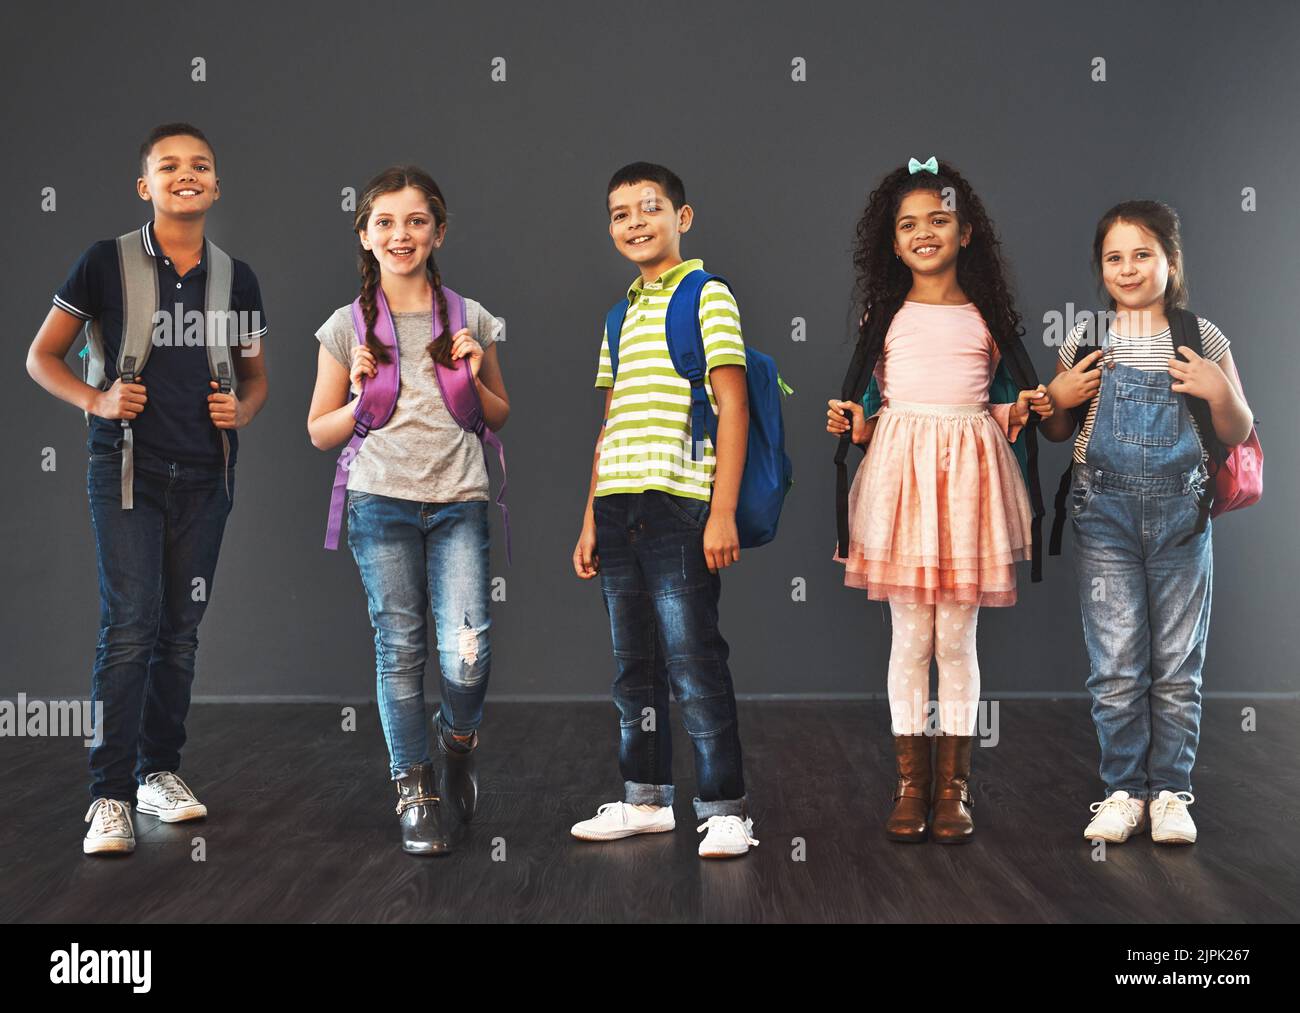 Today is the start of something new. Studio portrait of a diverse group of kids carrying their school backpacks against a gray background. Stock Photo